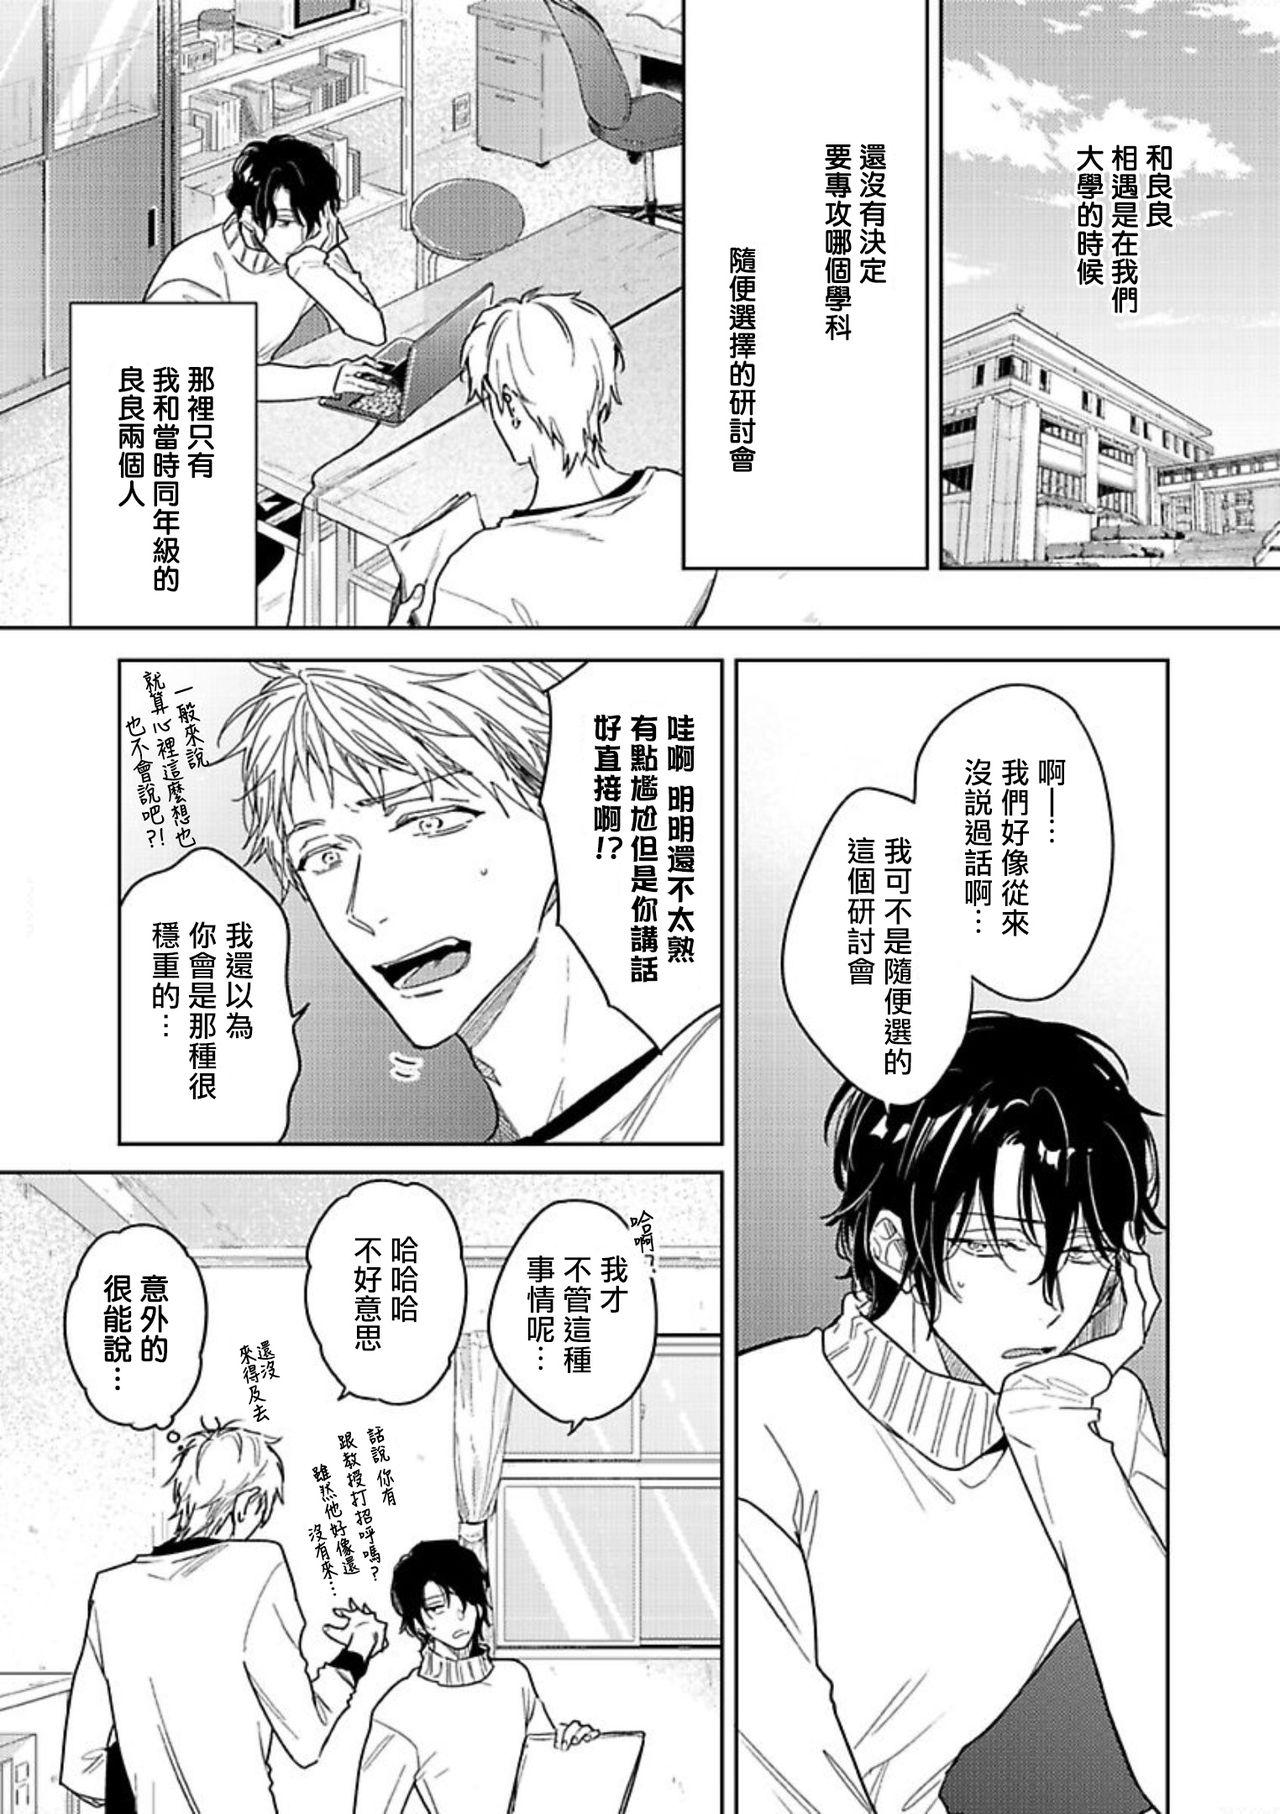 Tasogare Cure Important | 黄昏CURE IMPORTENT Ch. 1-3 64